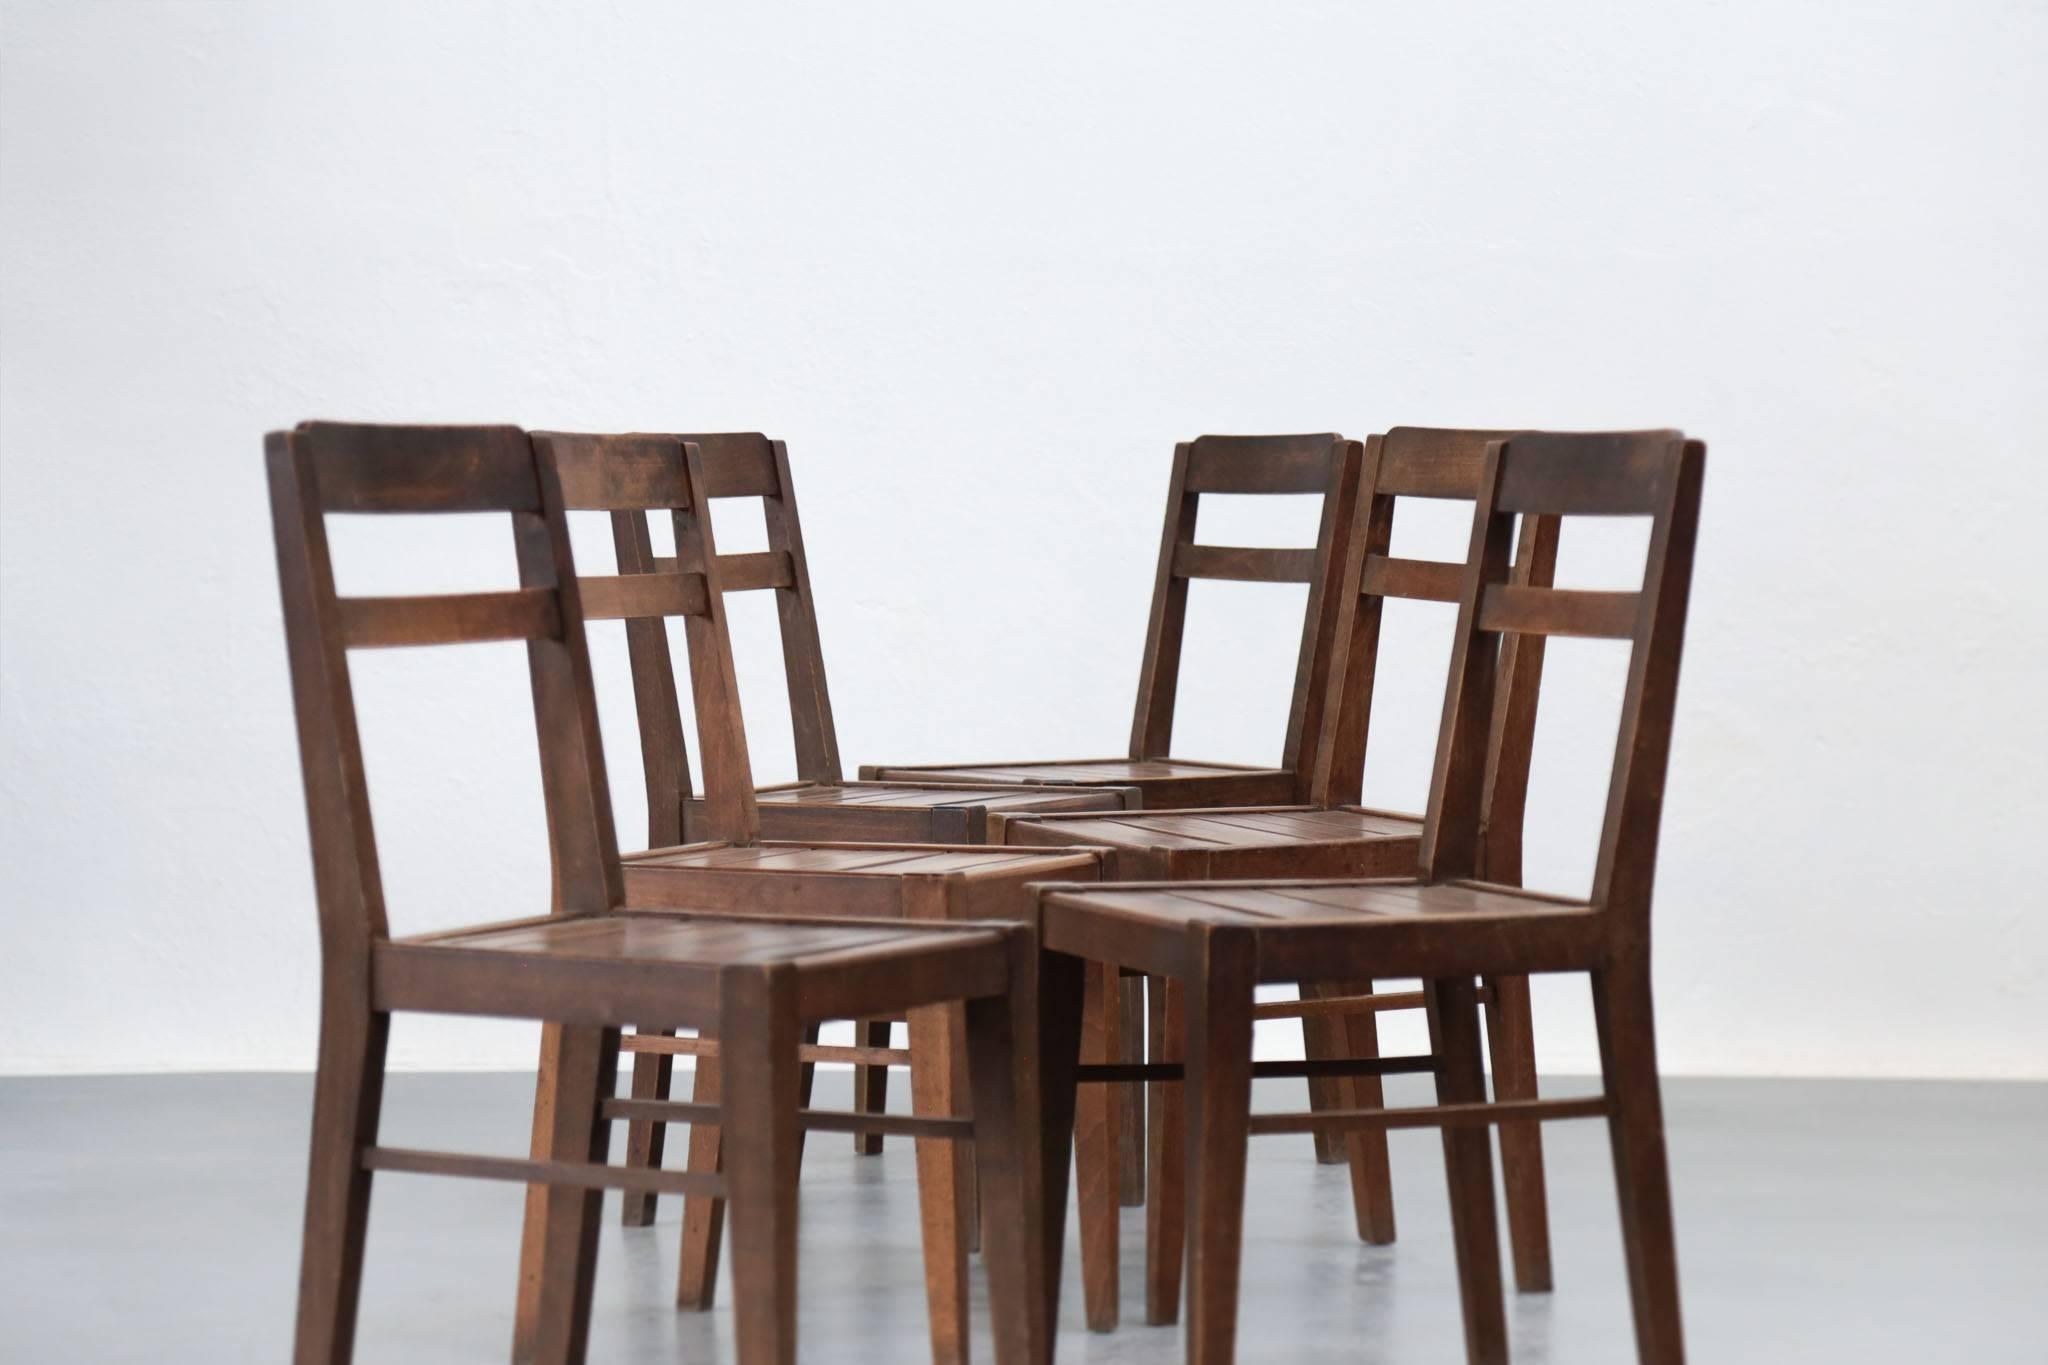 Six chairs in the style of René Gabriel made of oak.